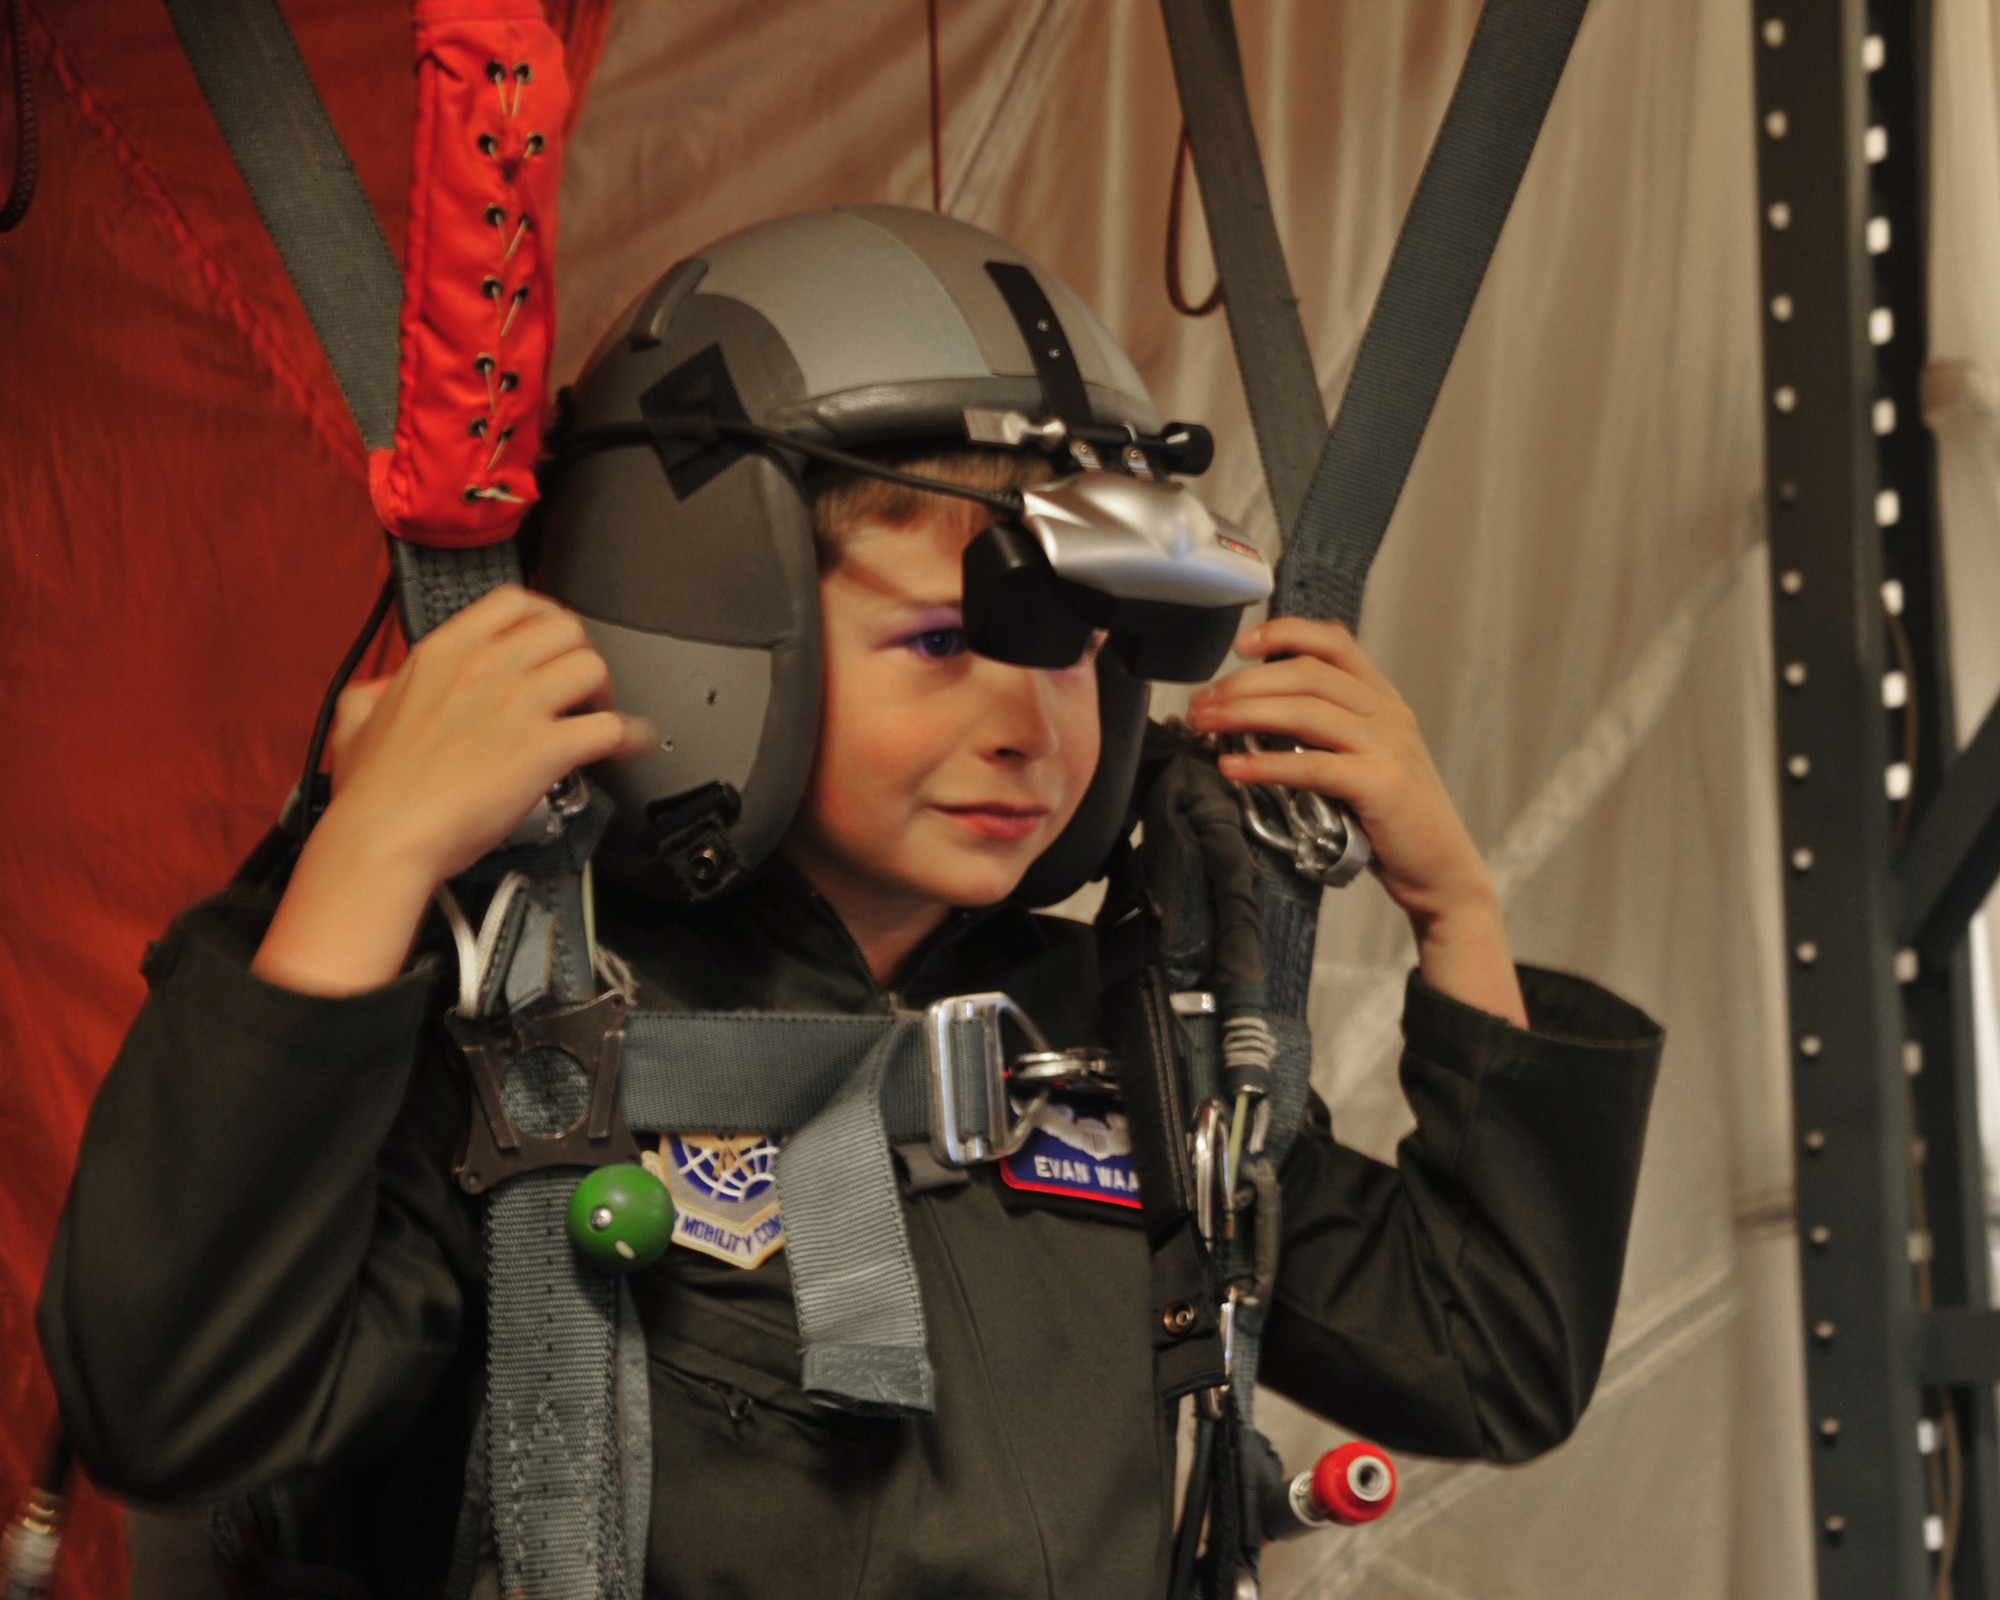 Evan Waara, "Pilot for a Day," prepares to "parachute" and land on a simulated naval ship July 7 at Joint Base Lewis-McChord, Wash. Evan had an opportunity to be strapped on a virtual reality parachute simulator as part of the Pilot for a Day Program. (Air Force photo/Staff Sgt. Frances Kriss)